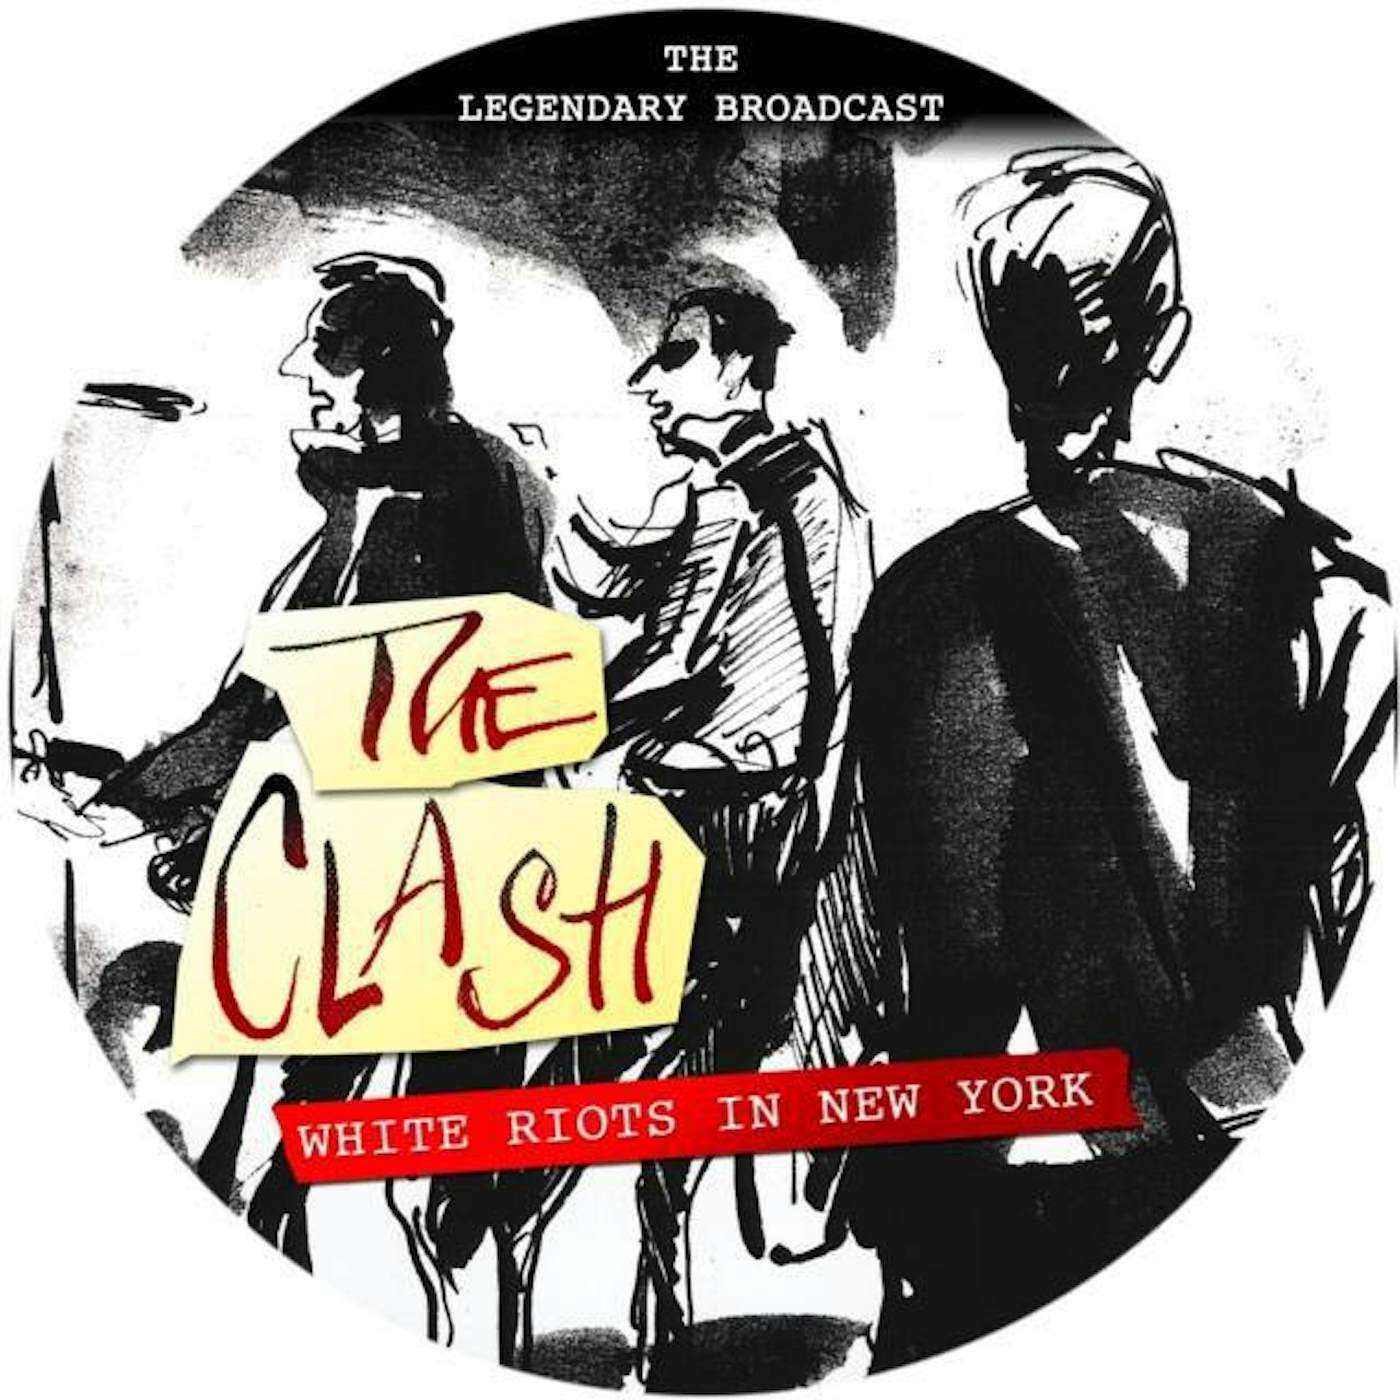 The Clash LP Vinyl Record - White Riots In New York (Picture Disc)